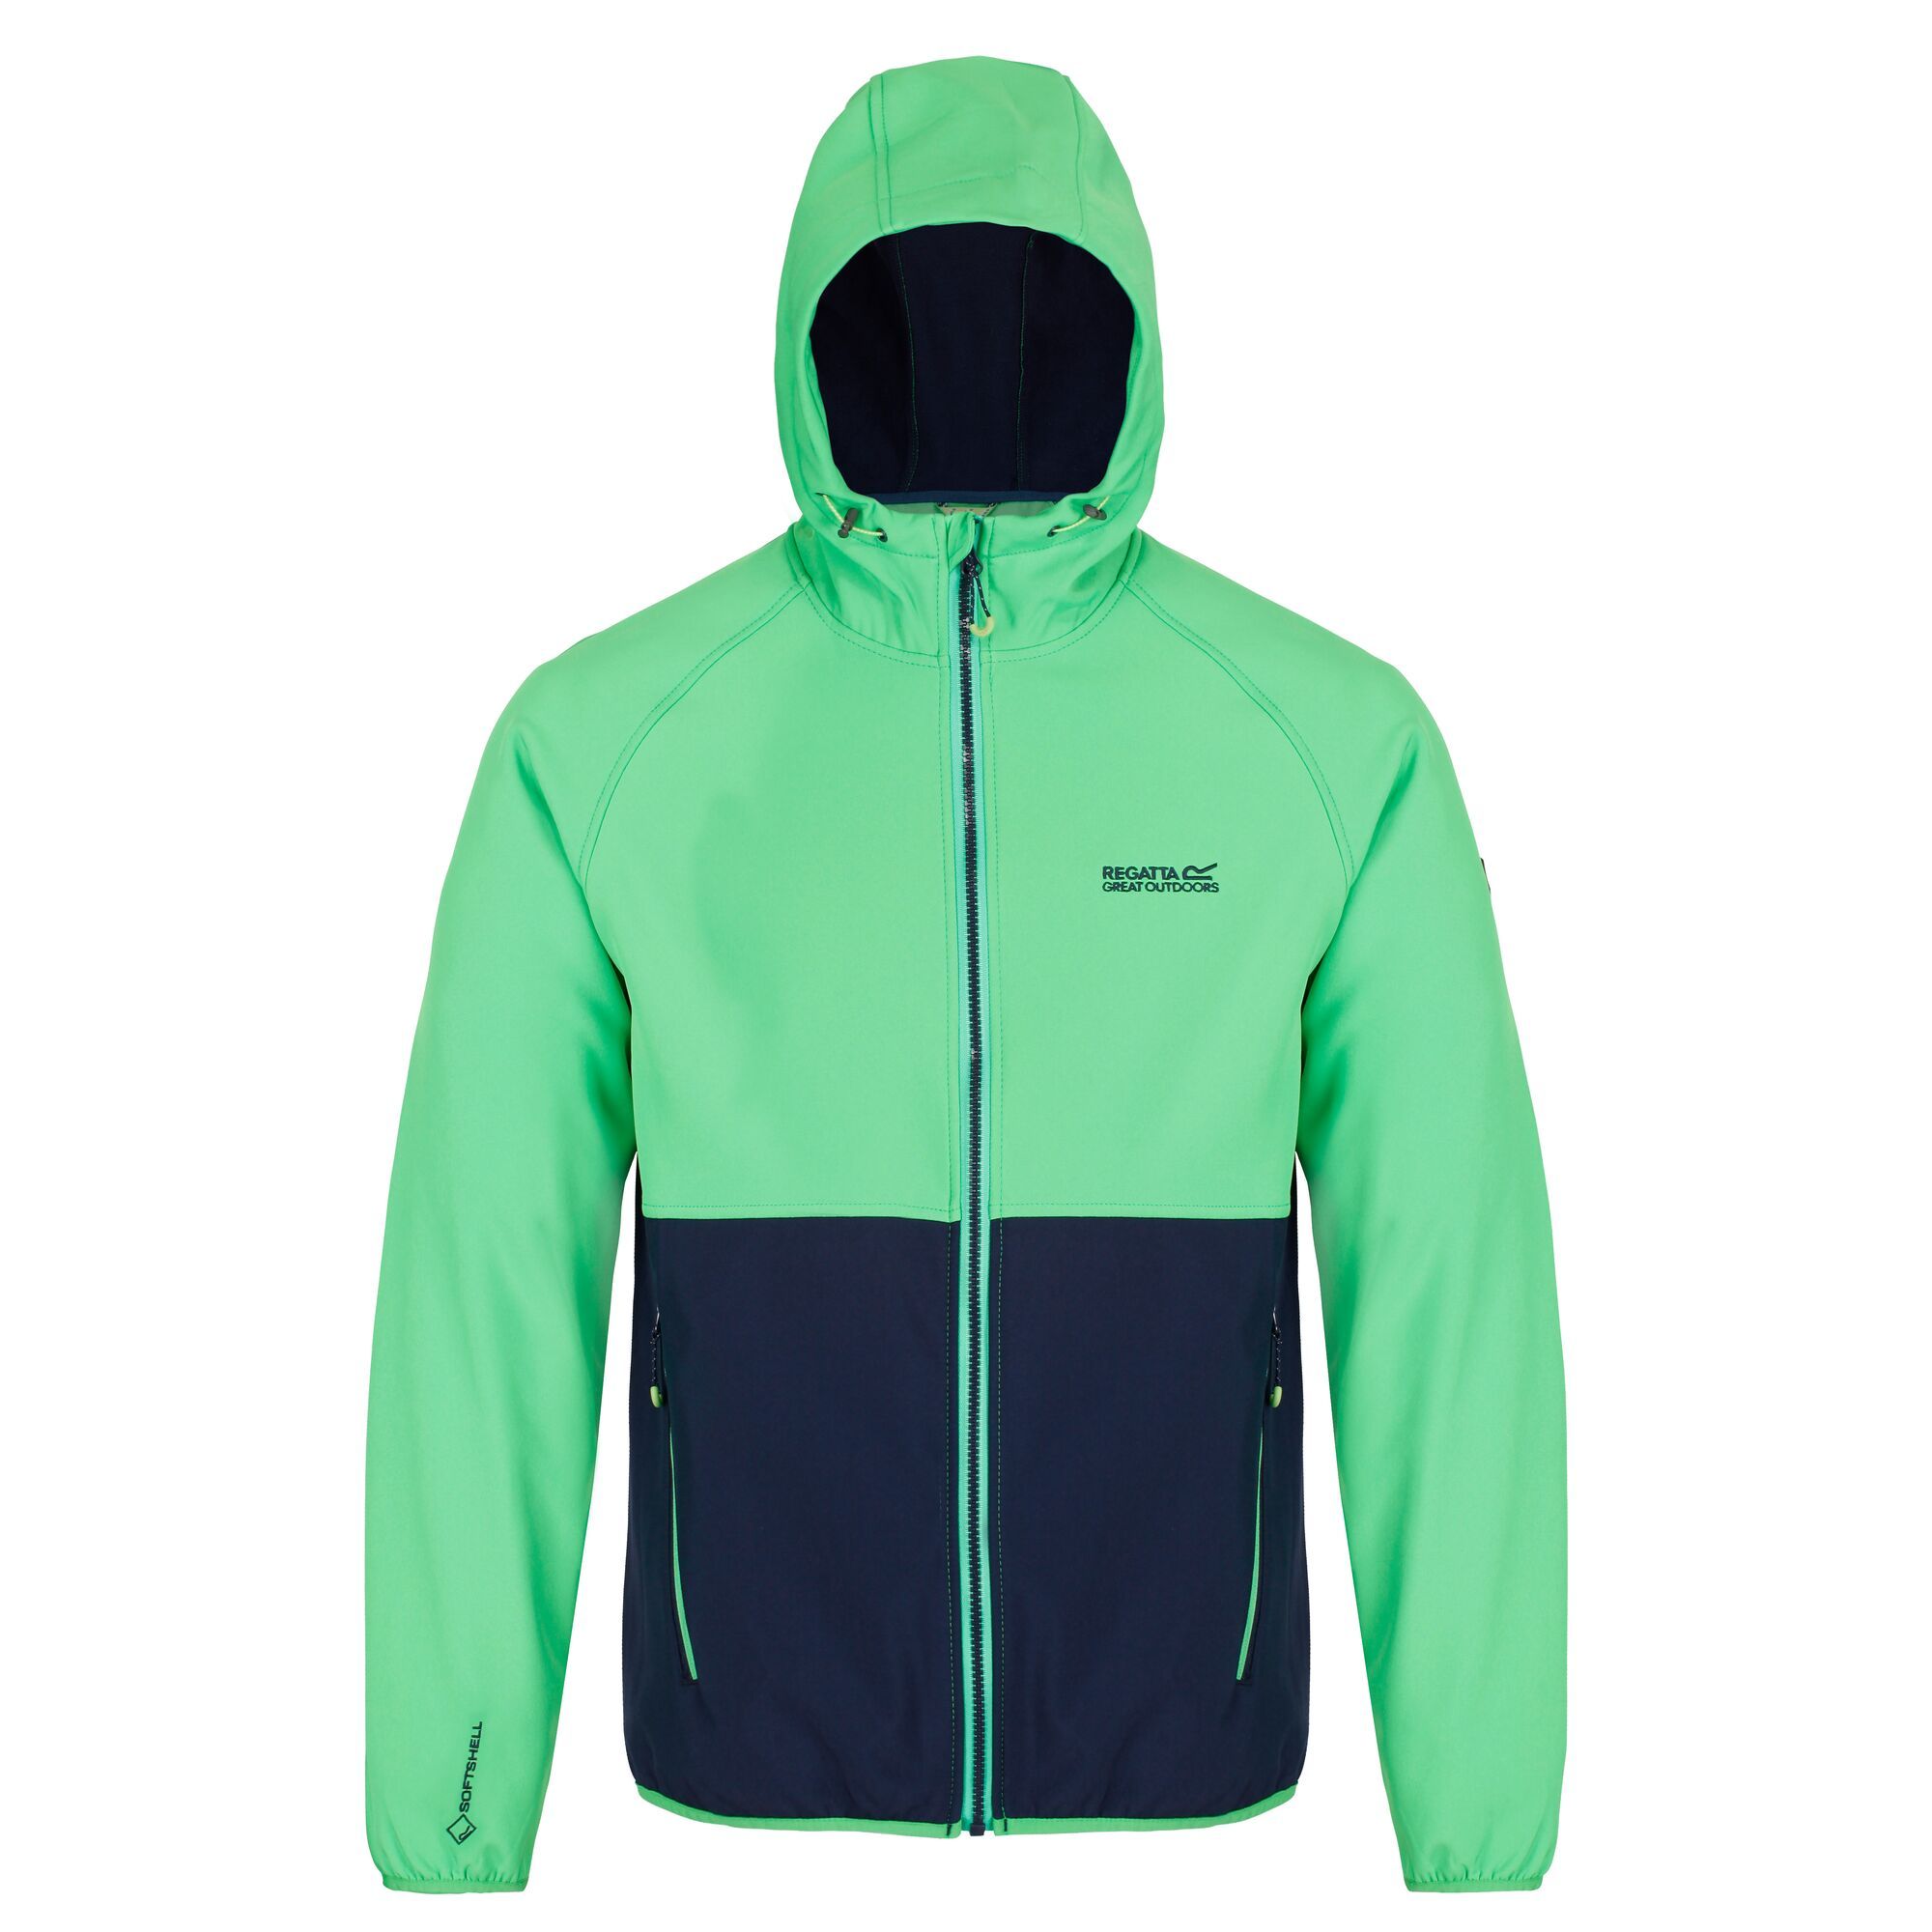 100% Polyester. Hooded, zip up jacket made from woven stretch softshell material with warming inner lining. Ideal for outdoor use in all weather. Hand wash.